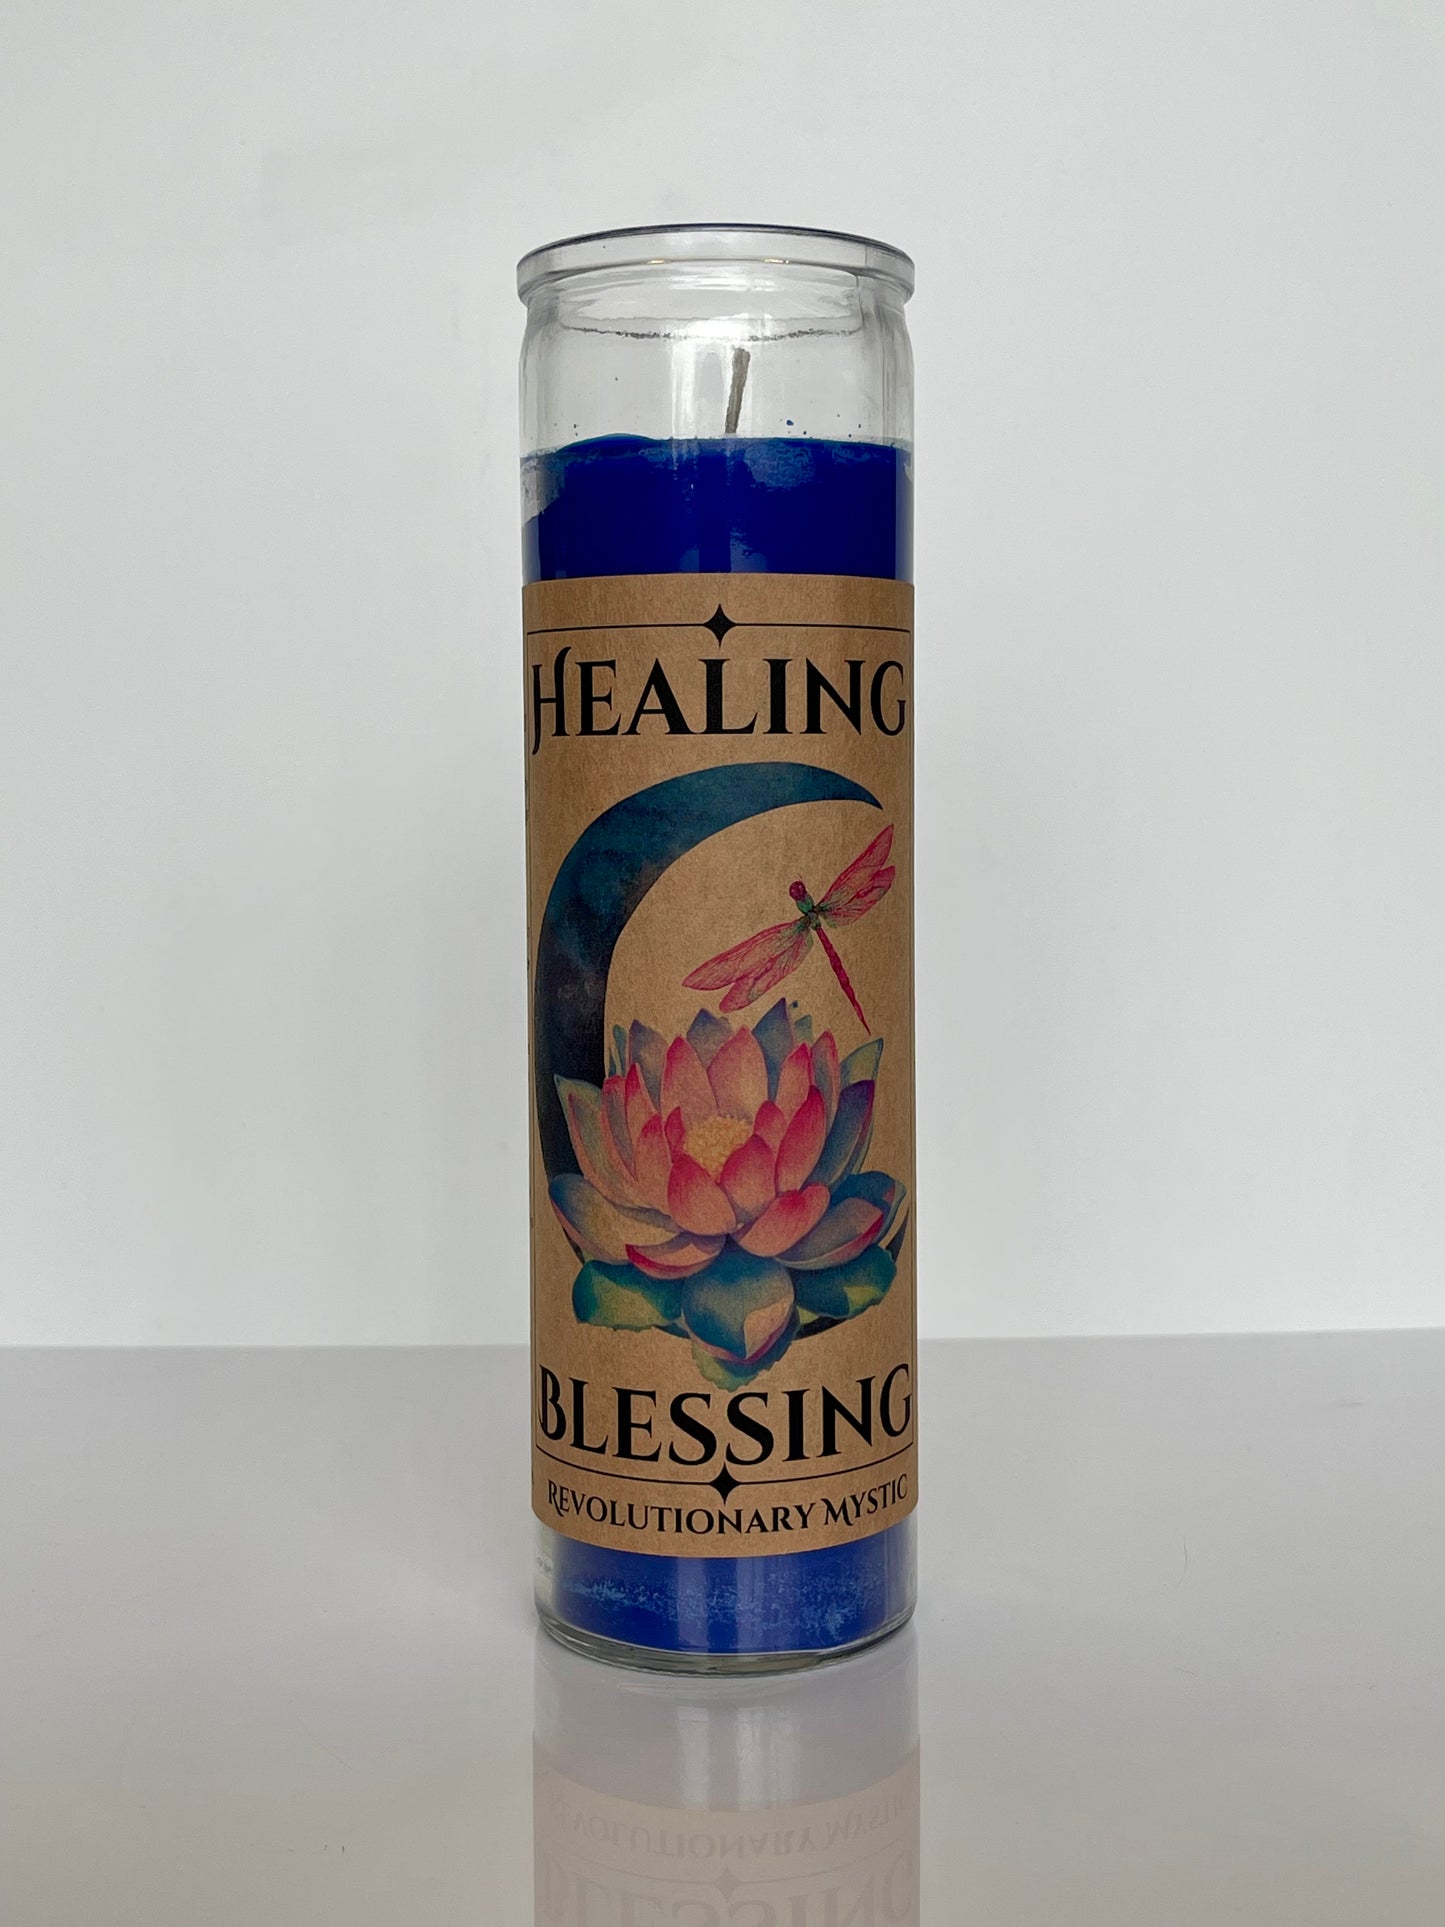 Healing Blessing Candle - Revolutionary Mystic